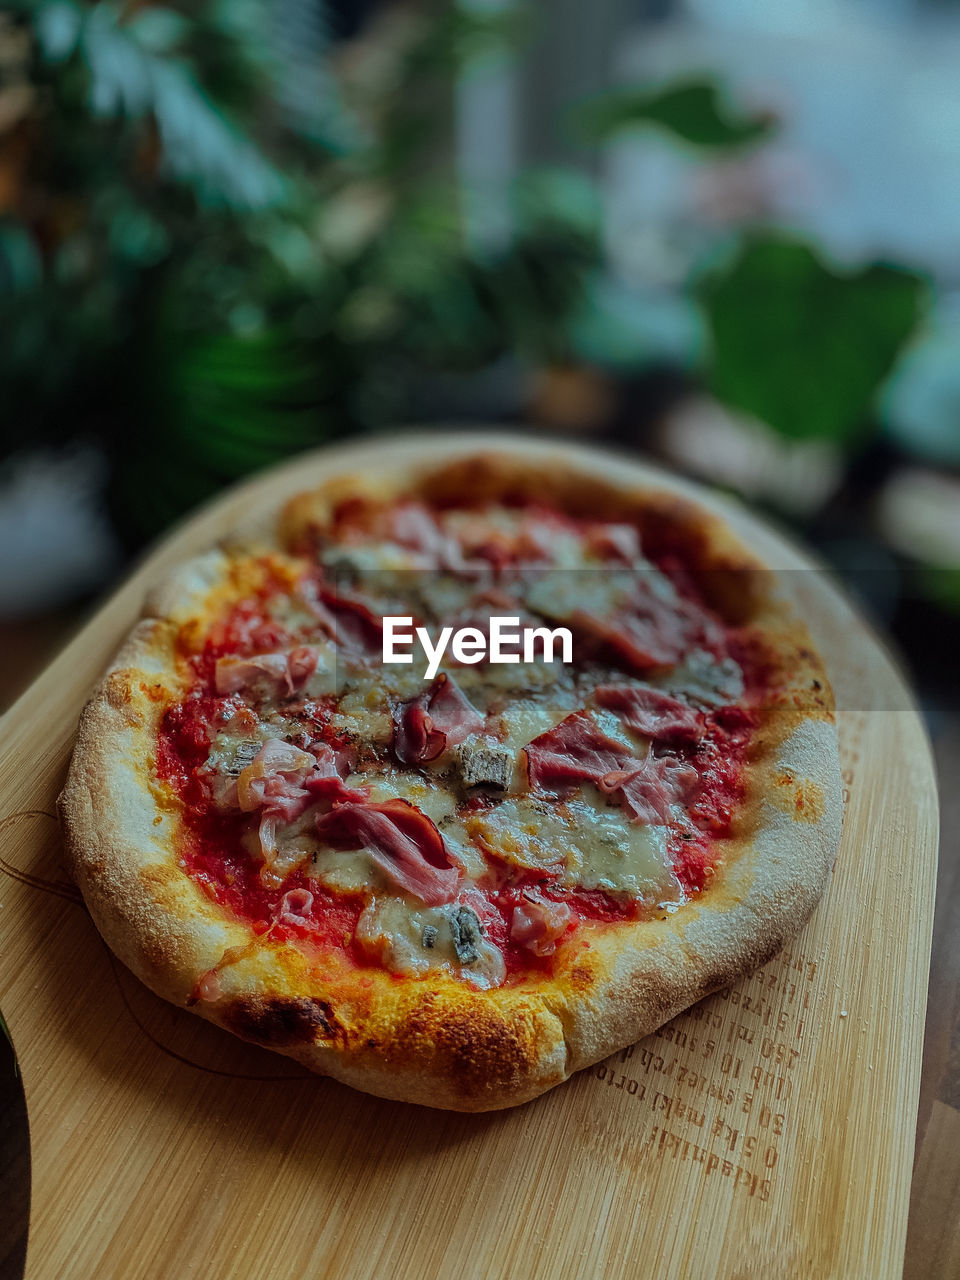 food and drink, food, pizza, fast food, dish, freshness, italian food, dairy, cuisine, wood, no people, fruit, cheese, vegetable, produce, table, baked, healthy eating, indoors, close-up, focus on foreground, plant, meal, dessert, herb, slice, cutting board